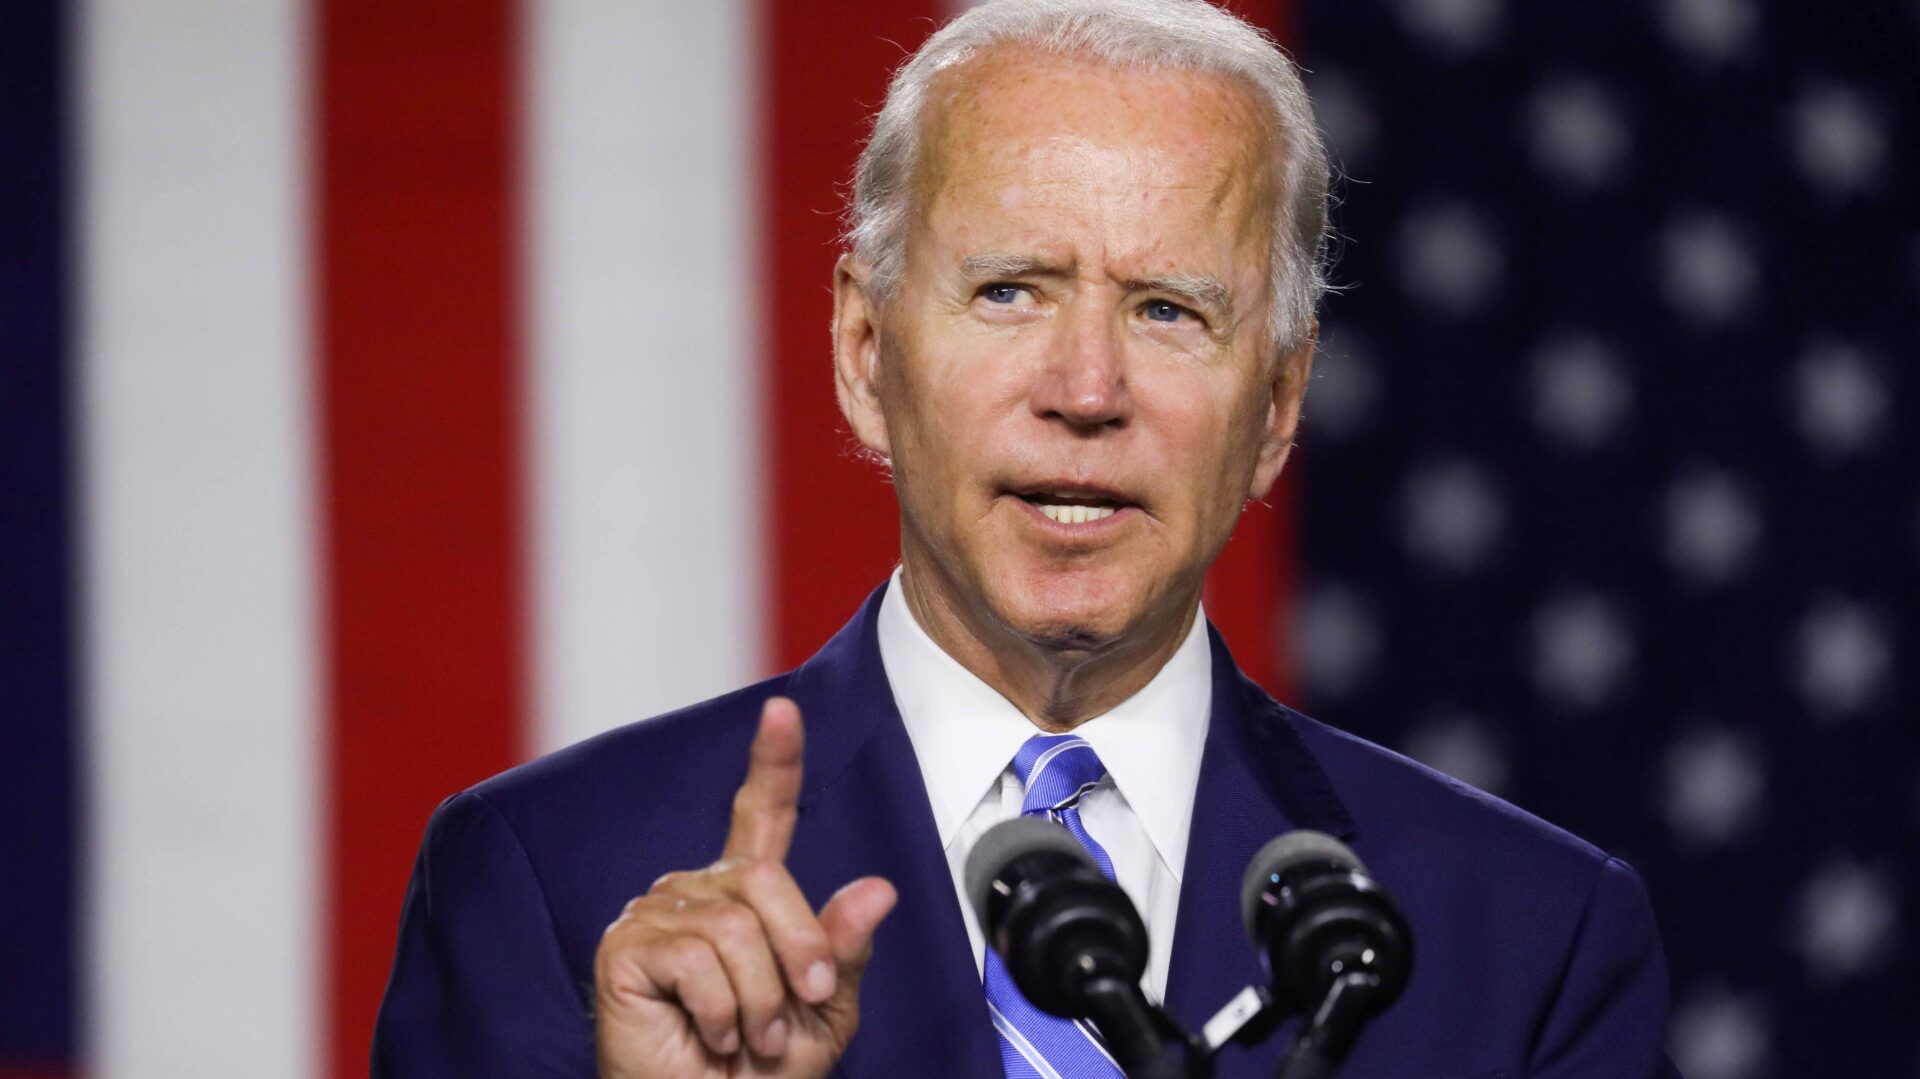 Biden Addresses Housing Crisis In State Of The Union